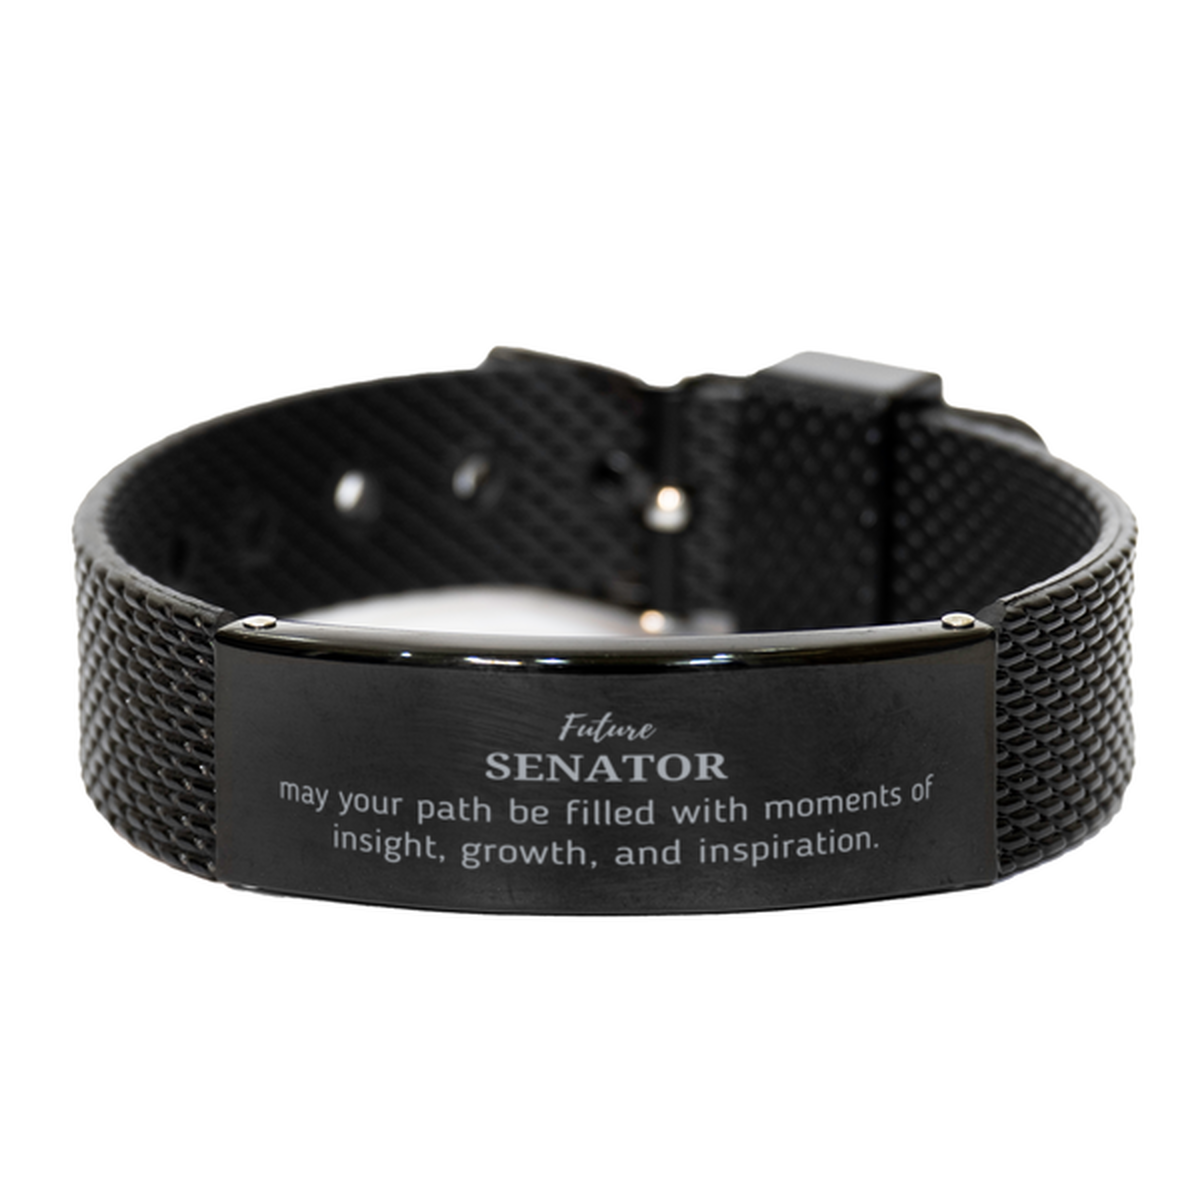 Future Senator Gifts, May your path be filled with moments of insight, Graduation Gifts for New Senator, Christmas Unique Black Shark Mesh Bracelet For Men, Women, Friends